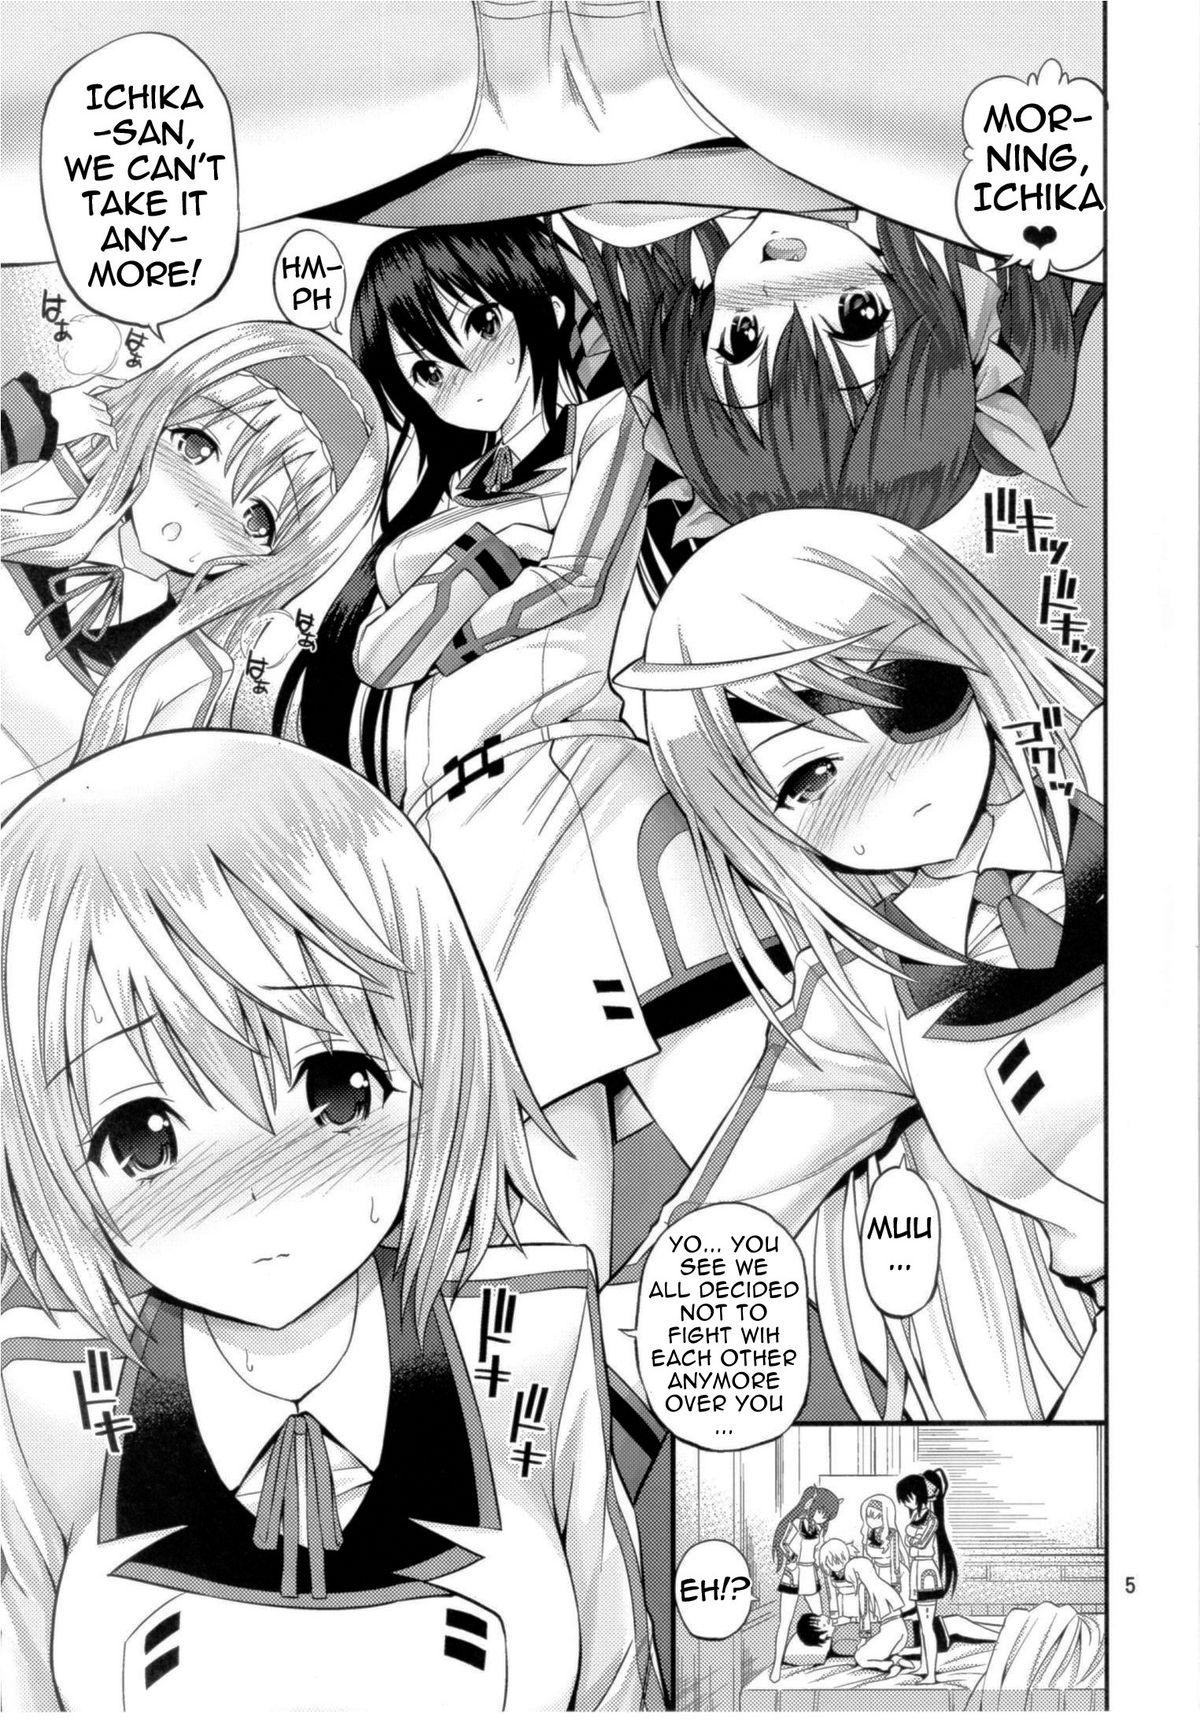 Spit This is Harlem - Infinite stratos Smooth - Page 4